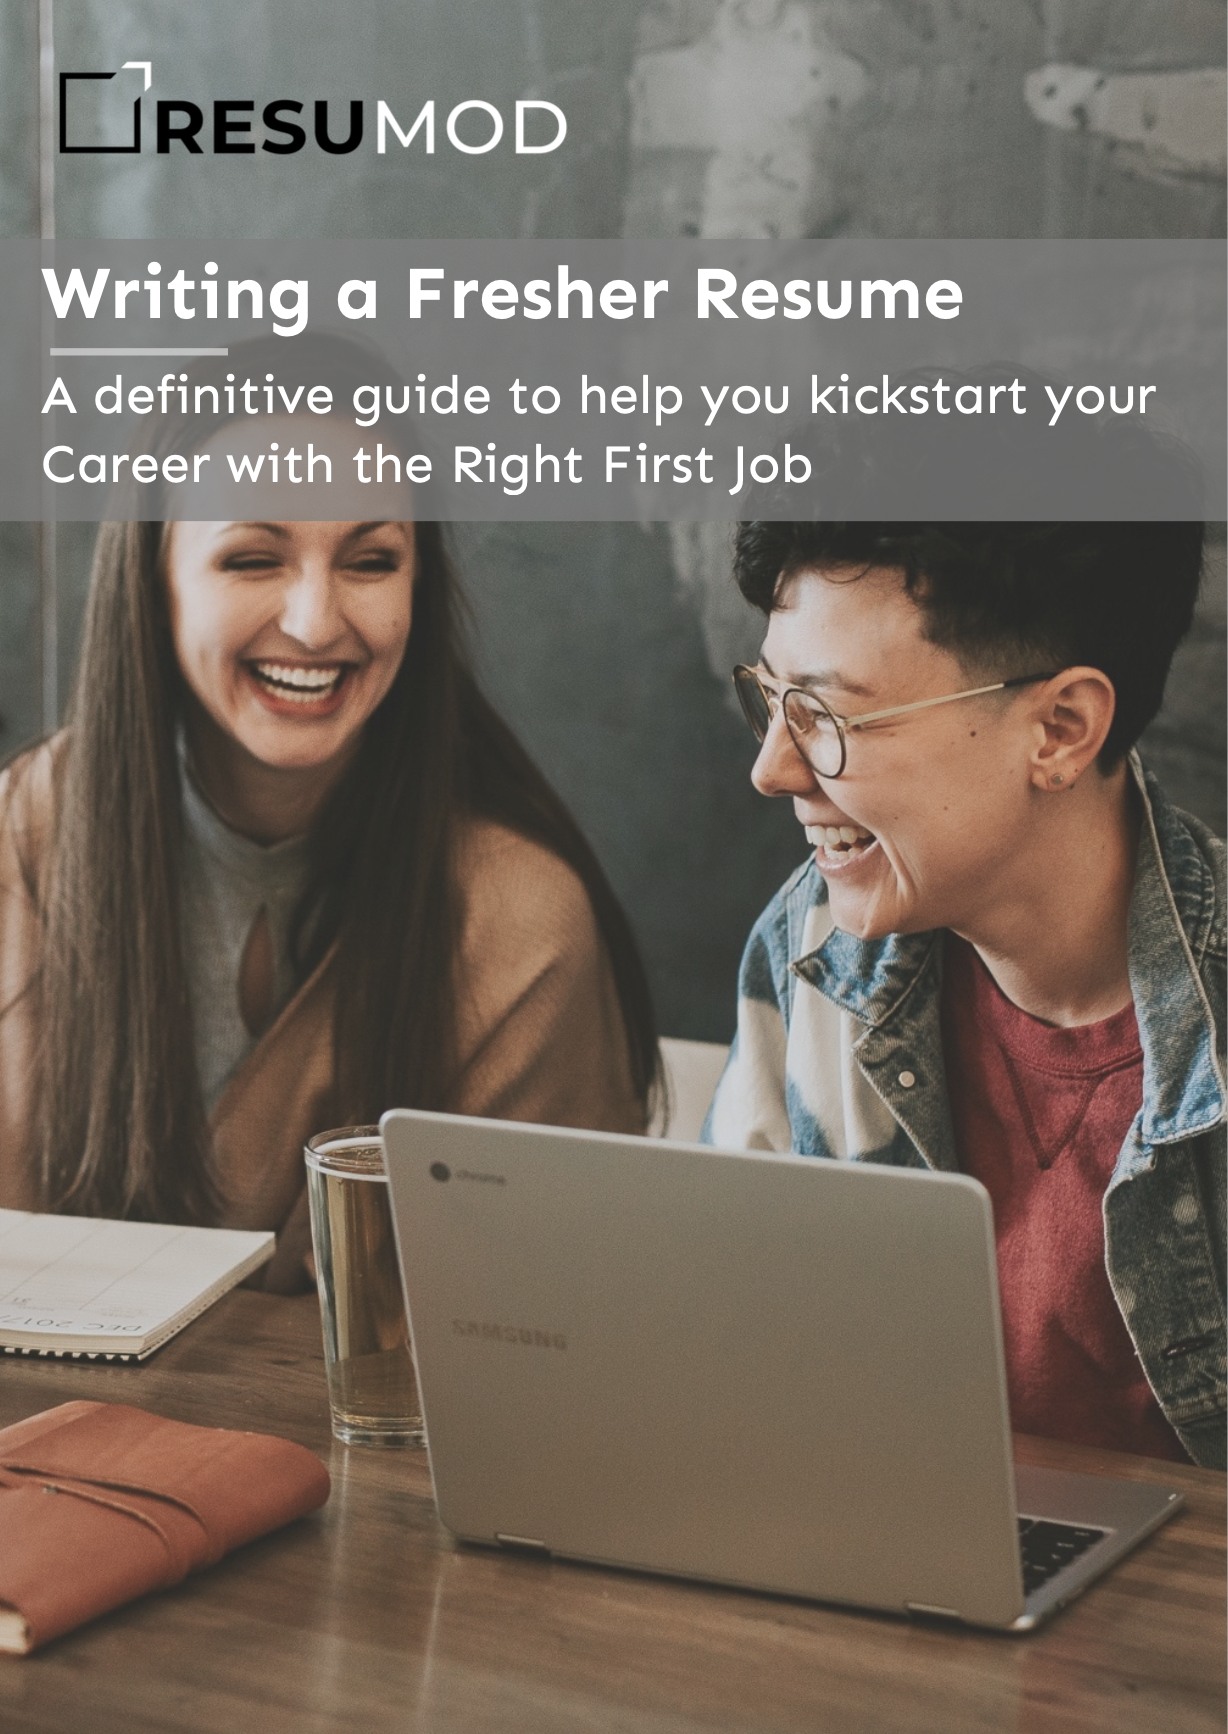 How to write a resume for freshers - Resumod ebook